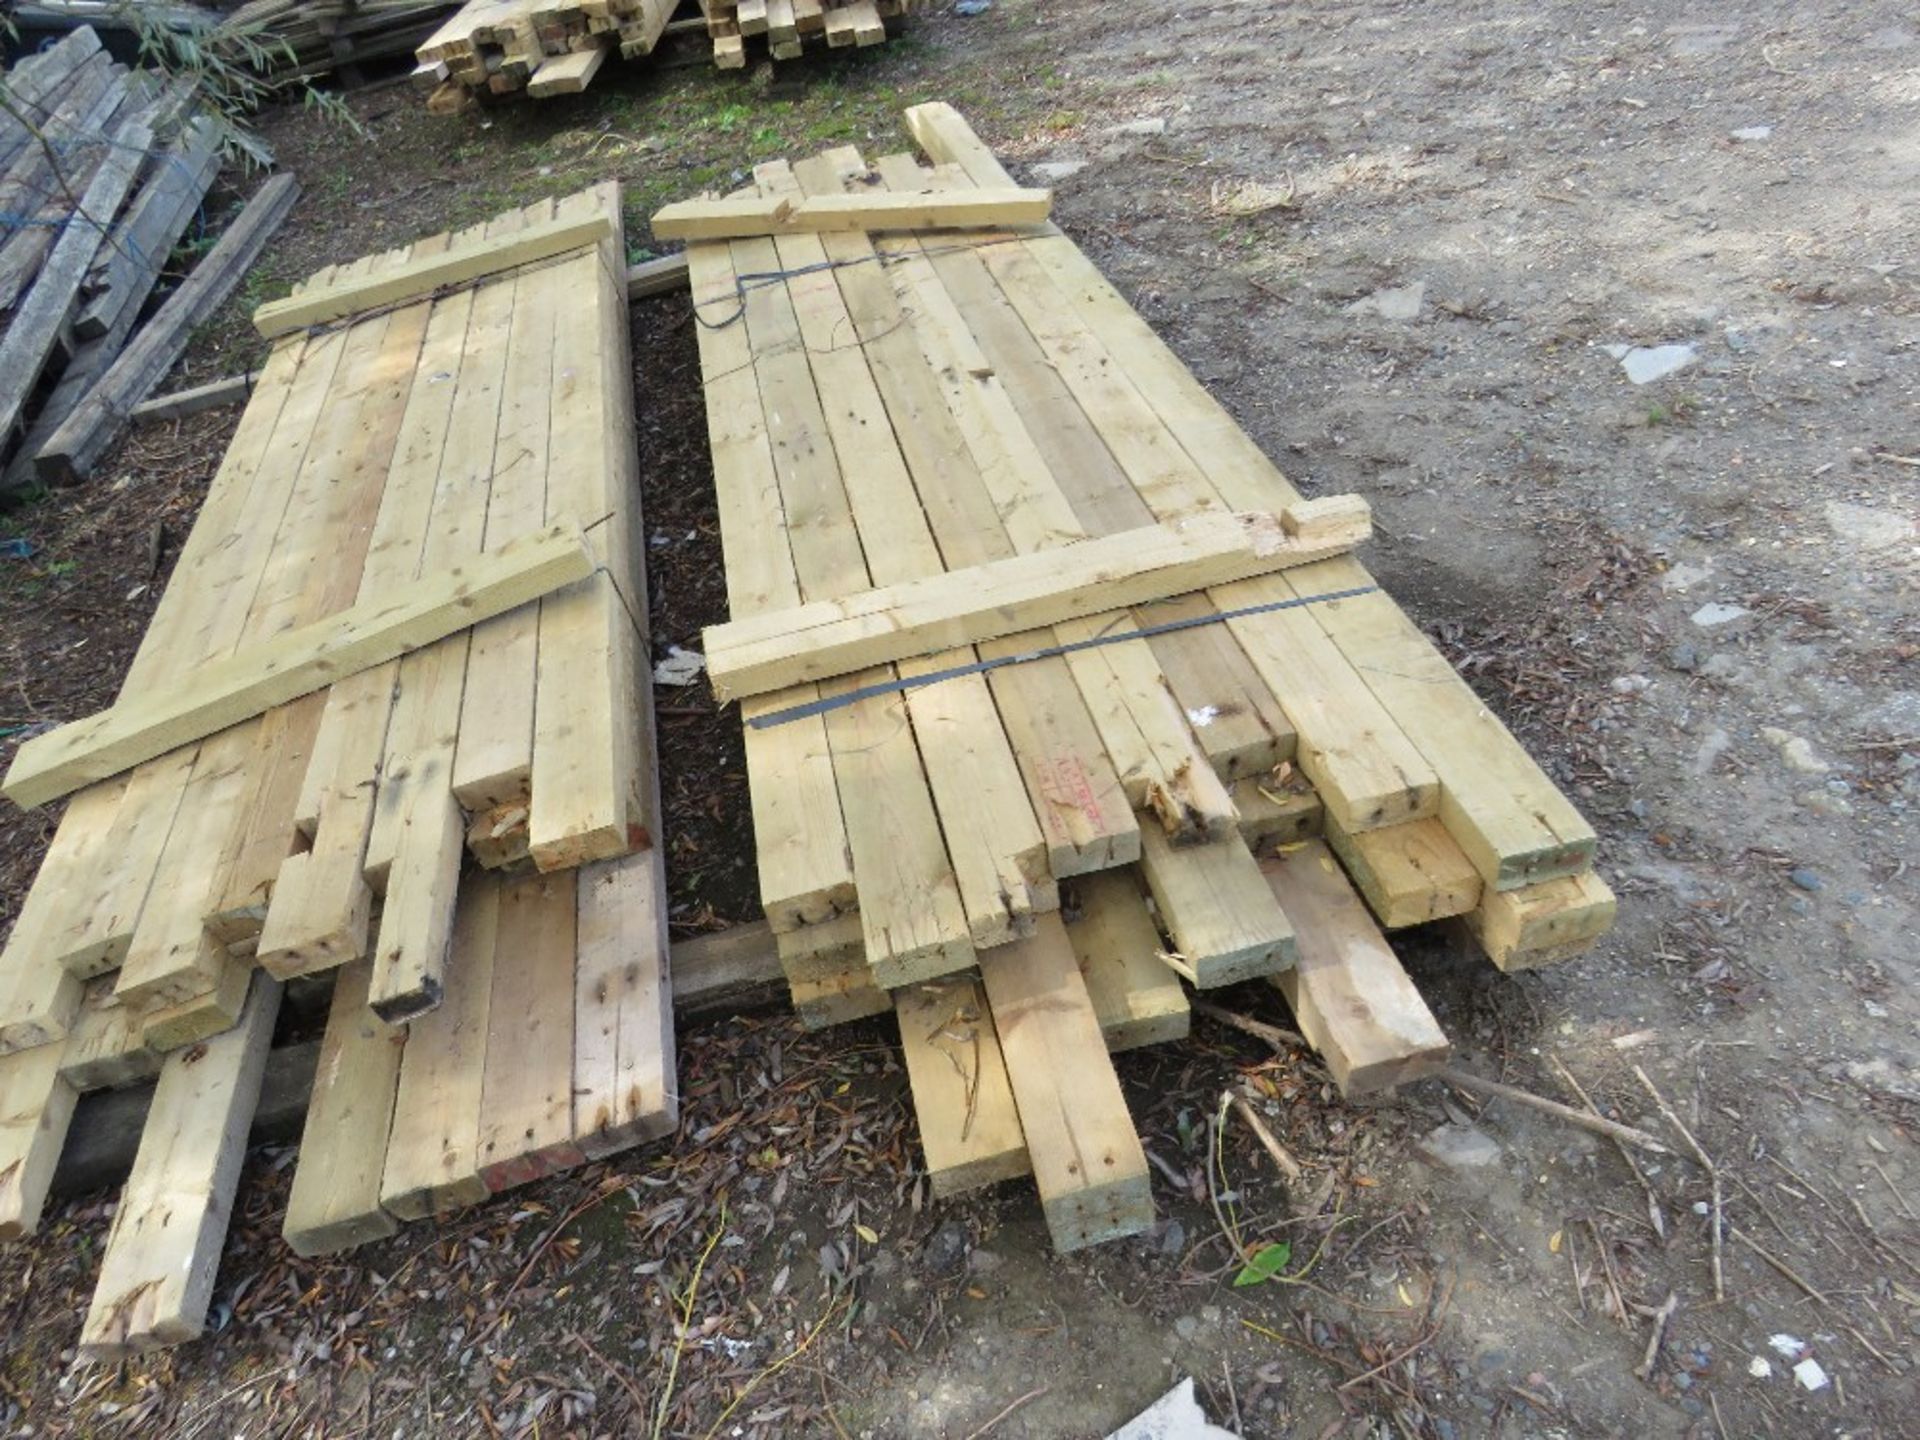 2 X BUNDLES OF PRE USED DE-NAILED 4X2 TIMBER. MAJORITY BEING 2.4-3M LENGTH APPROX. 32 PIECES IN EACH - Image 3 of 3